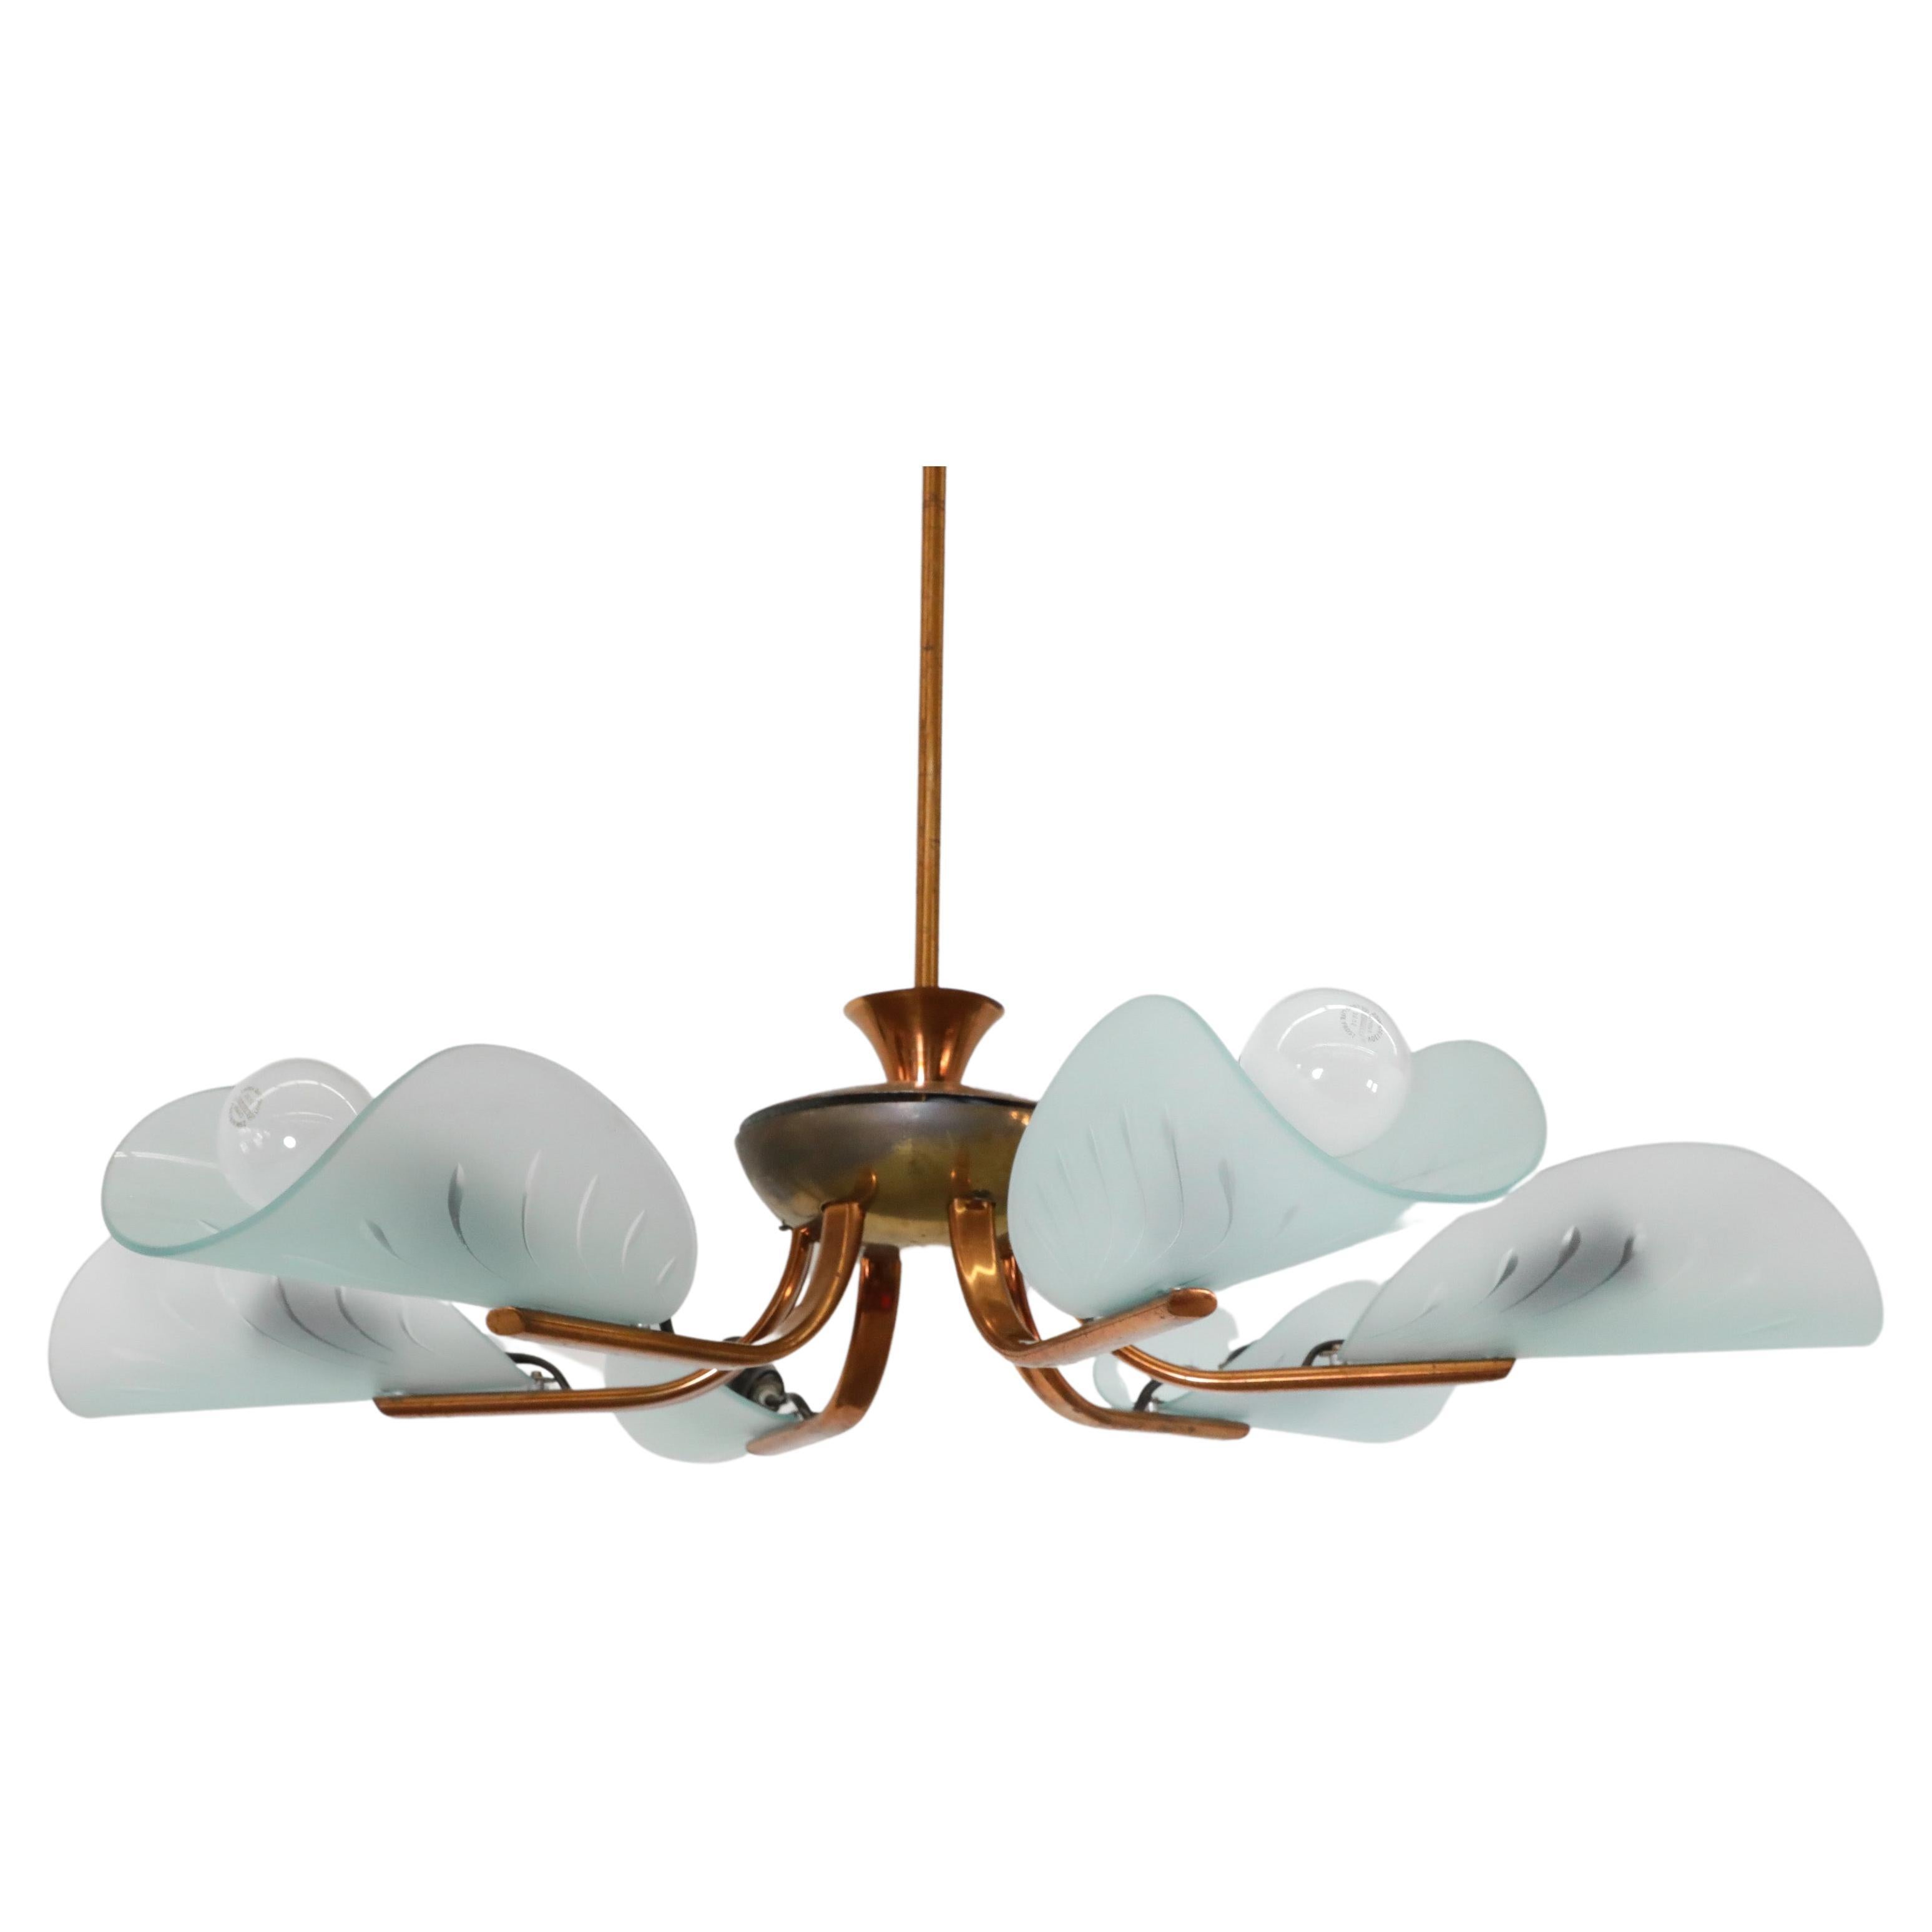 Art Deco Valinte Oy style Copper and Brass Chandelier with Petal Glass Shades